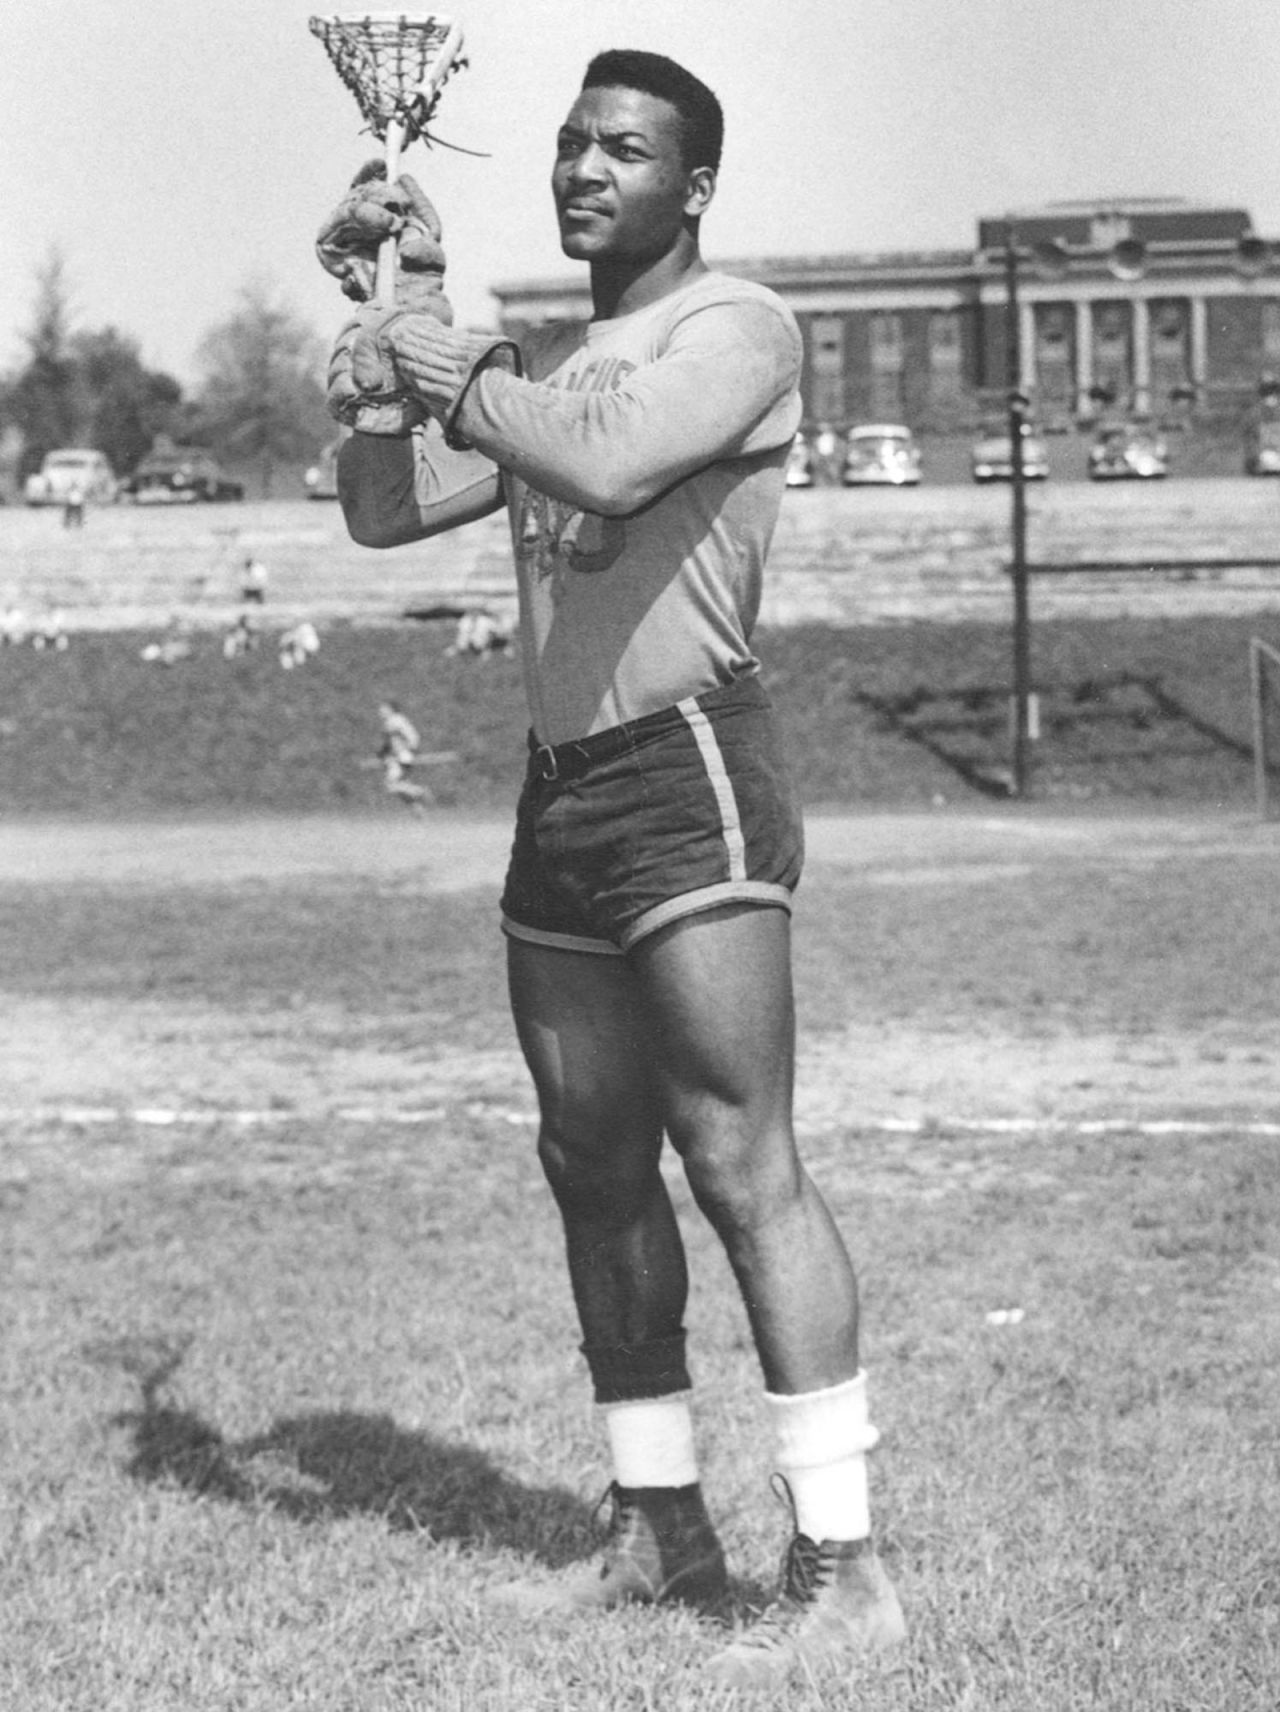 Brown was a multisport star at Syracuse University in New York, competing in basketball, football, lacrosse and track. He scored more than 70 lacrosse goals in two seasons for Syracuse, and he was inducted into the National Lacrosse Hall of Fame in 1983.